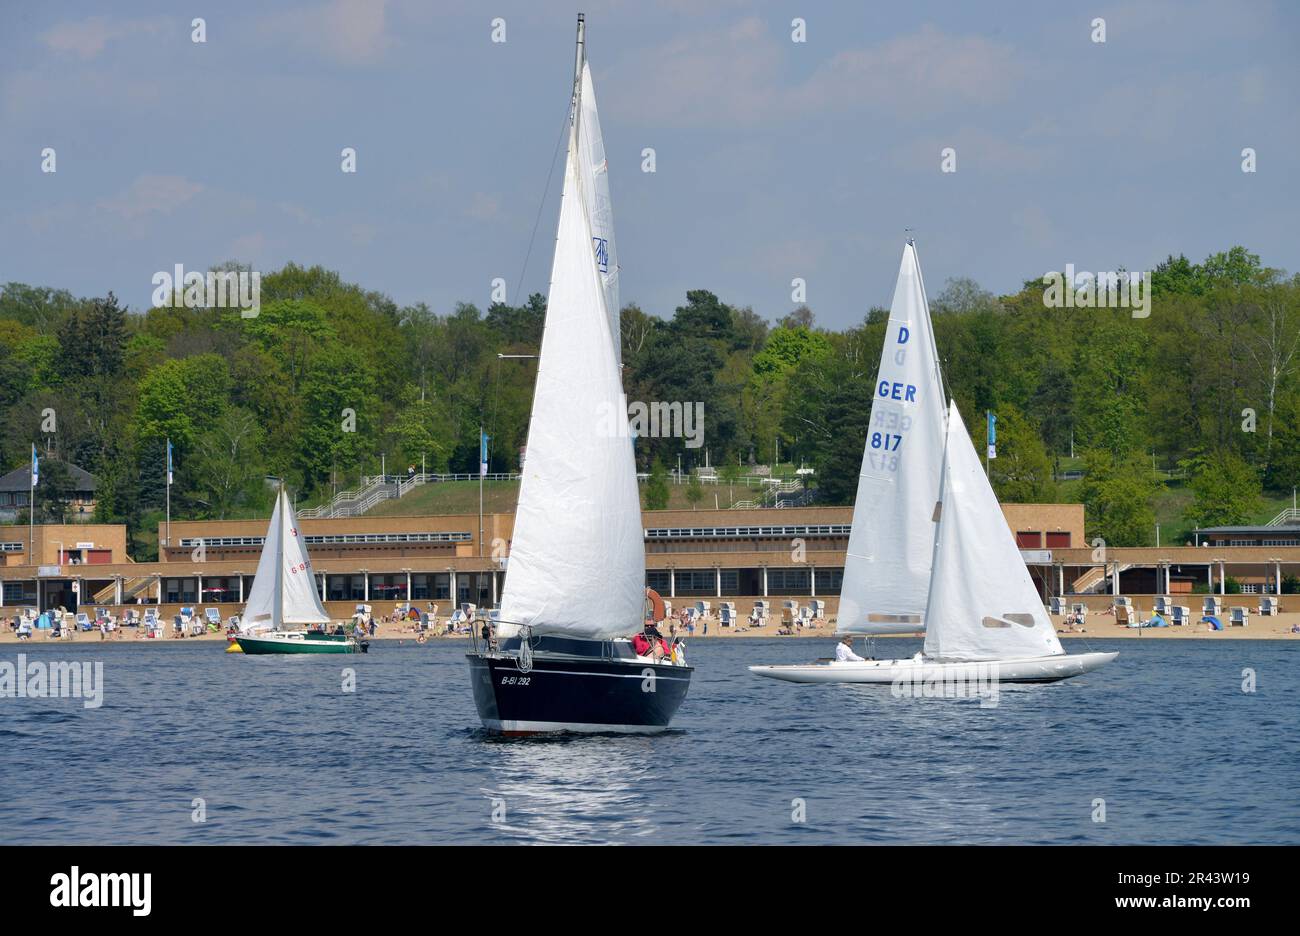 Sailboats, Wannsee lido, Wannsee, Berlin, Germany Stock Photo